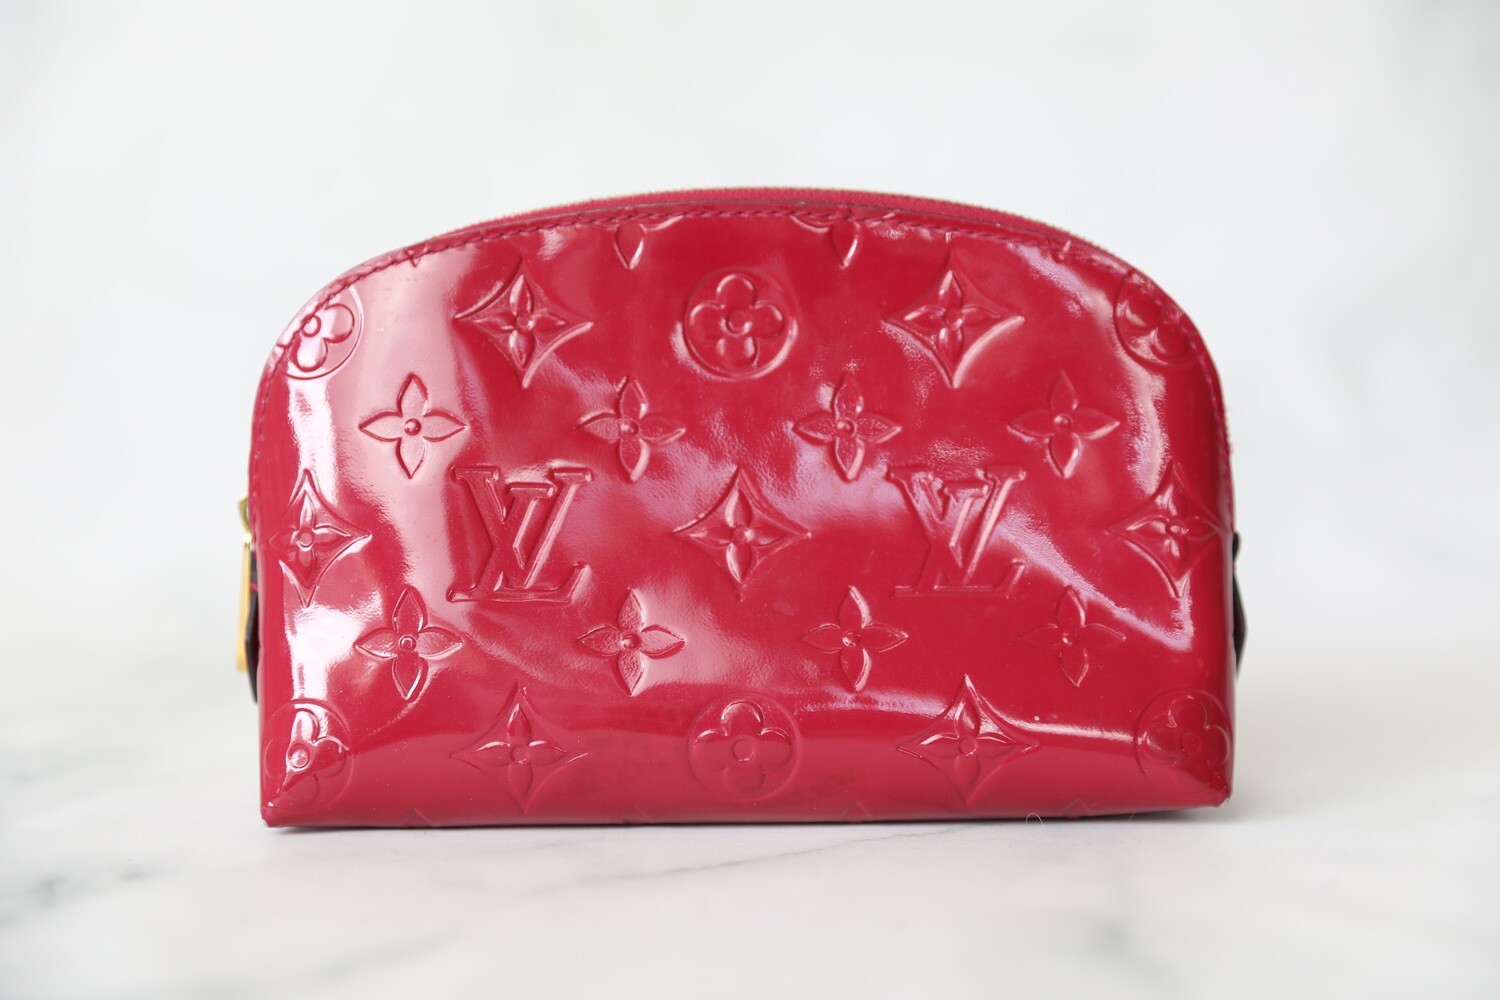 Louis Vuitton Red Monogram Vernis Leather Cosmetic Pouch